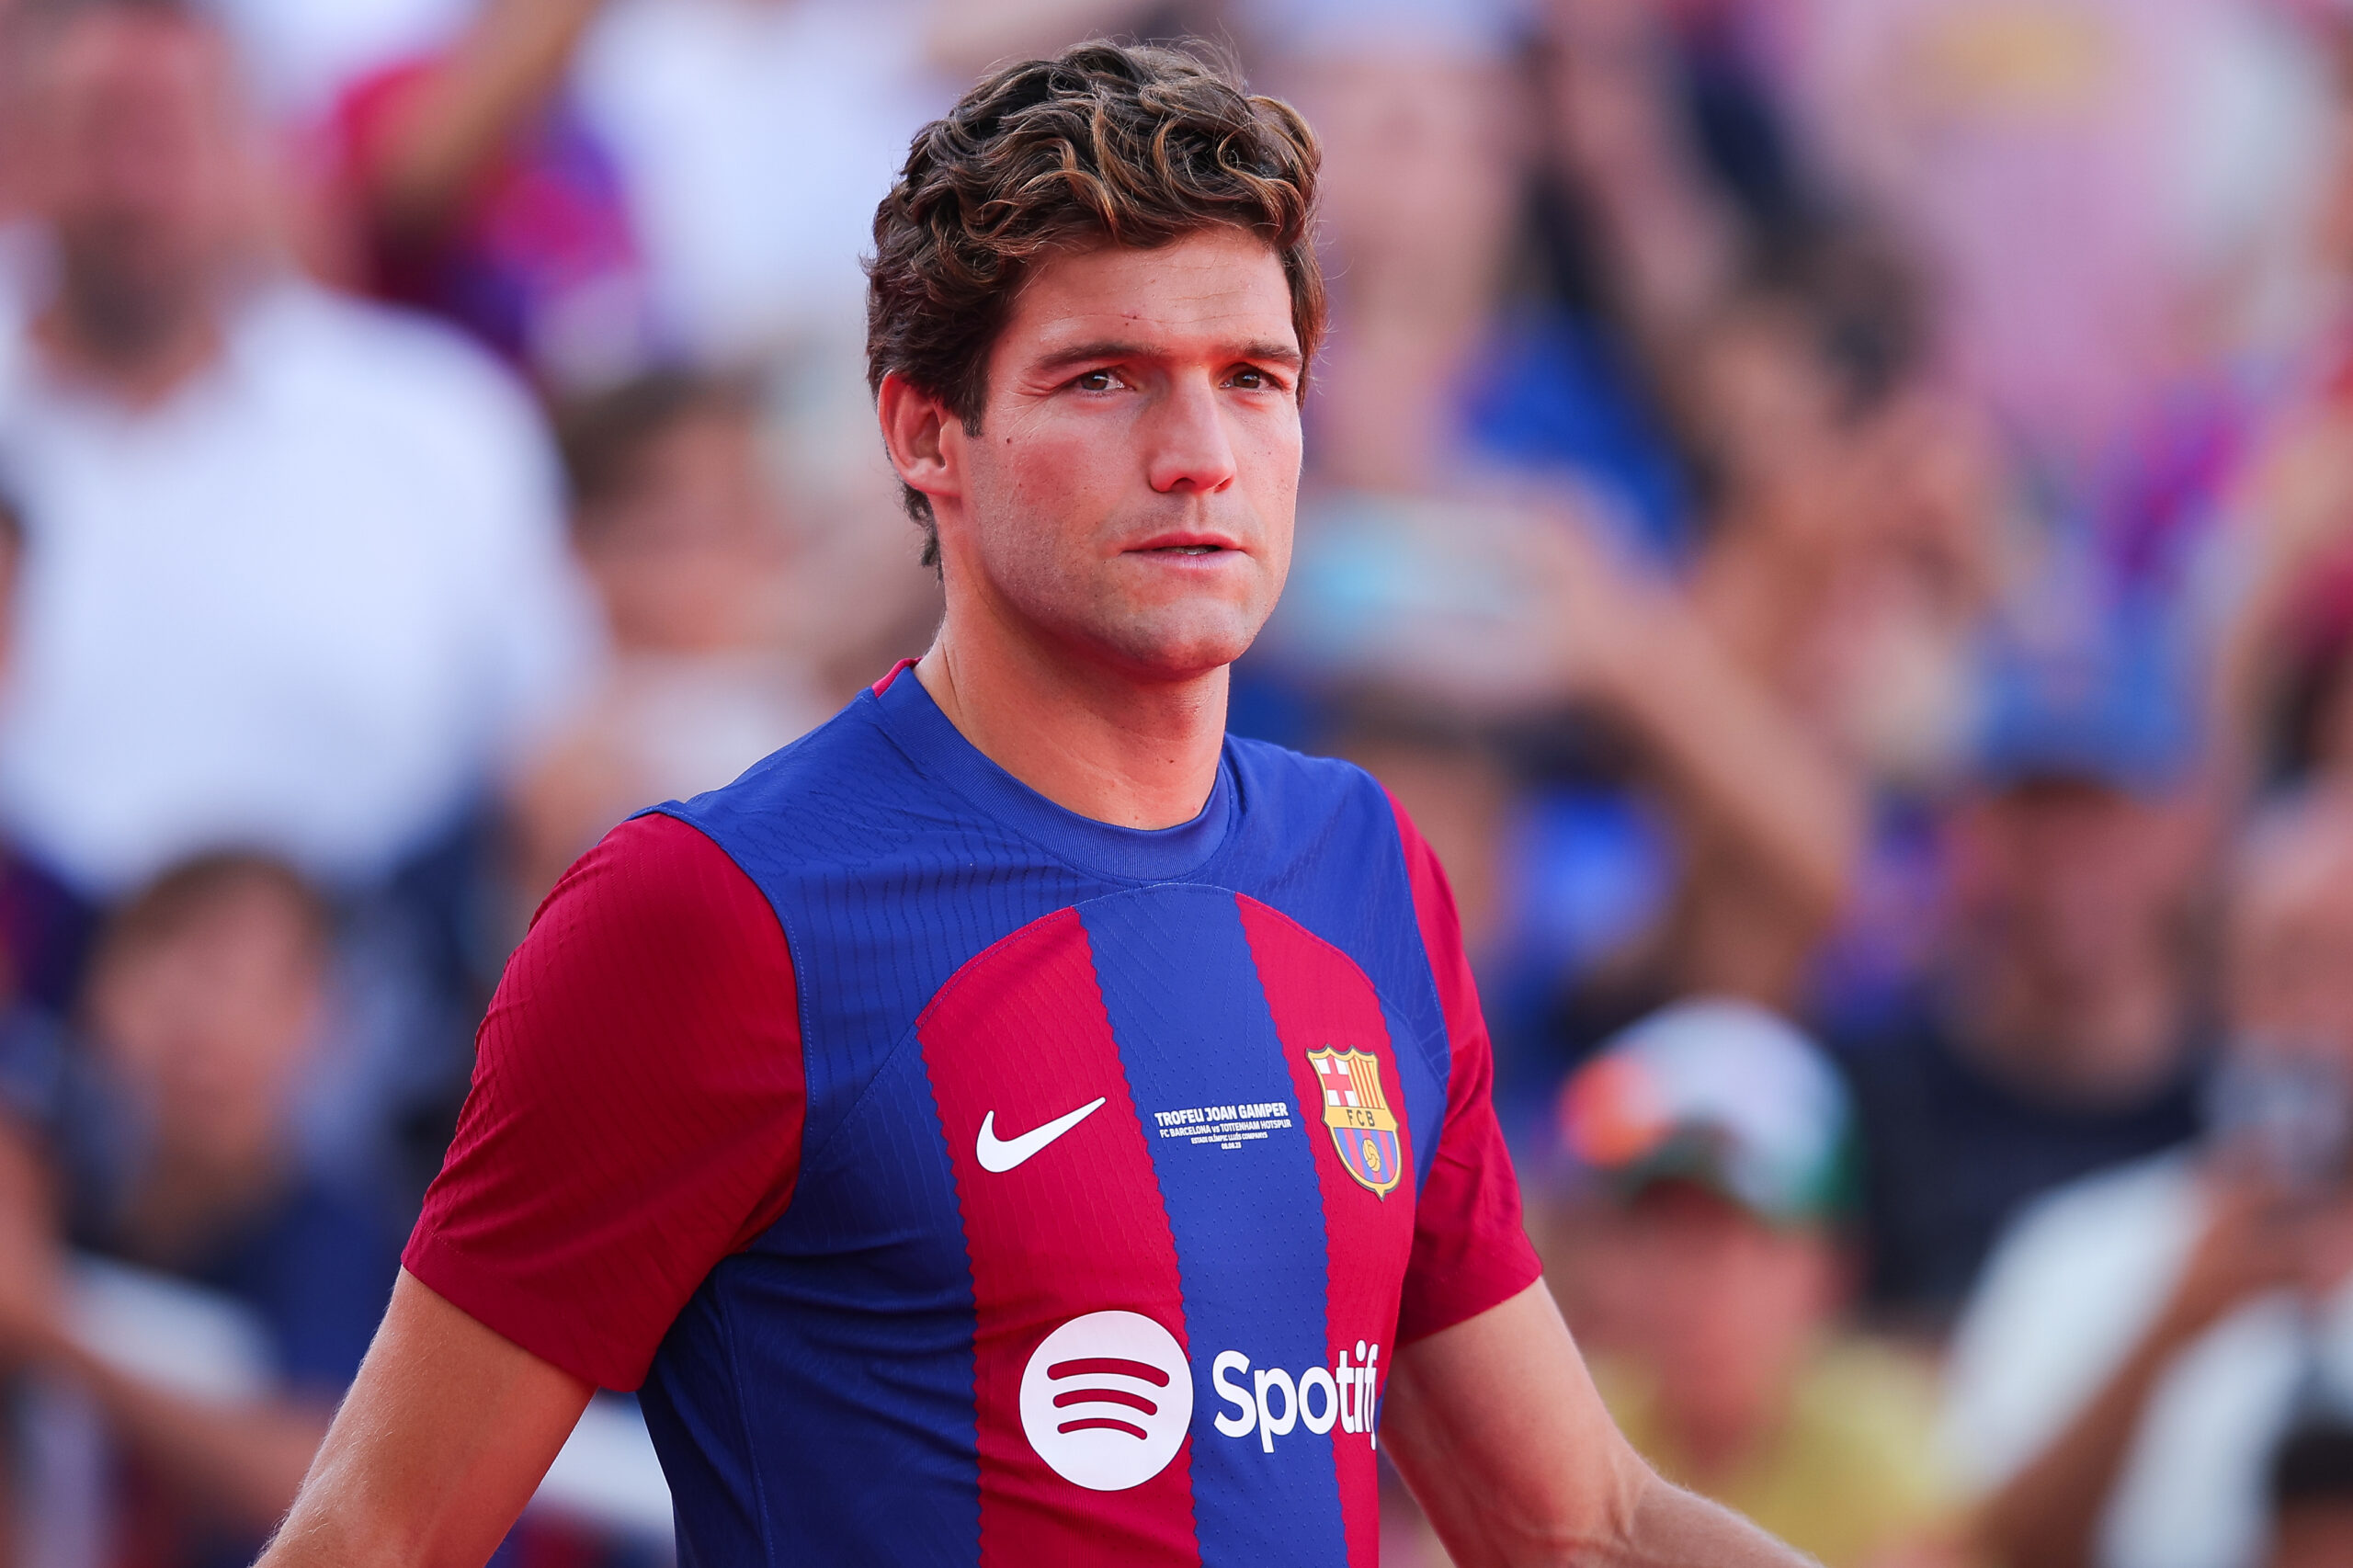 BARCELONA, SPAIN - AUGUST 08: Marcos Alonso of FC Barcelona waves the supporters during the presentation prior to the Joan Gamper Trophy match between FC Barcelona and Tottenham Hotspur at Estadi Olimpic Lluis Companys on August 08, 2023 in Barcelona, Spain.